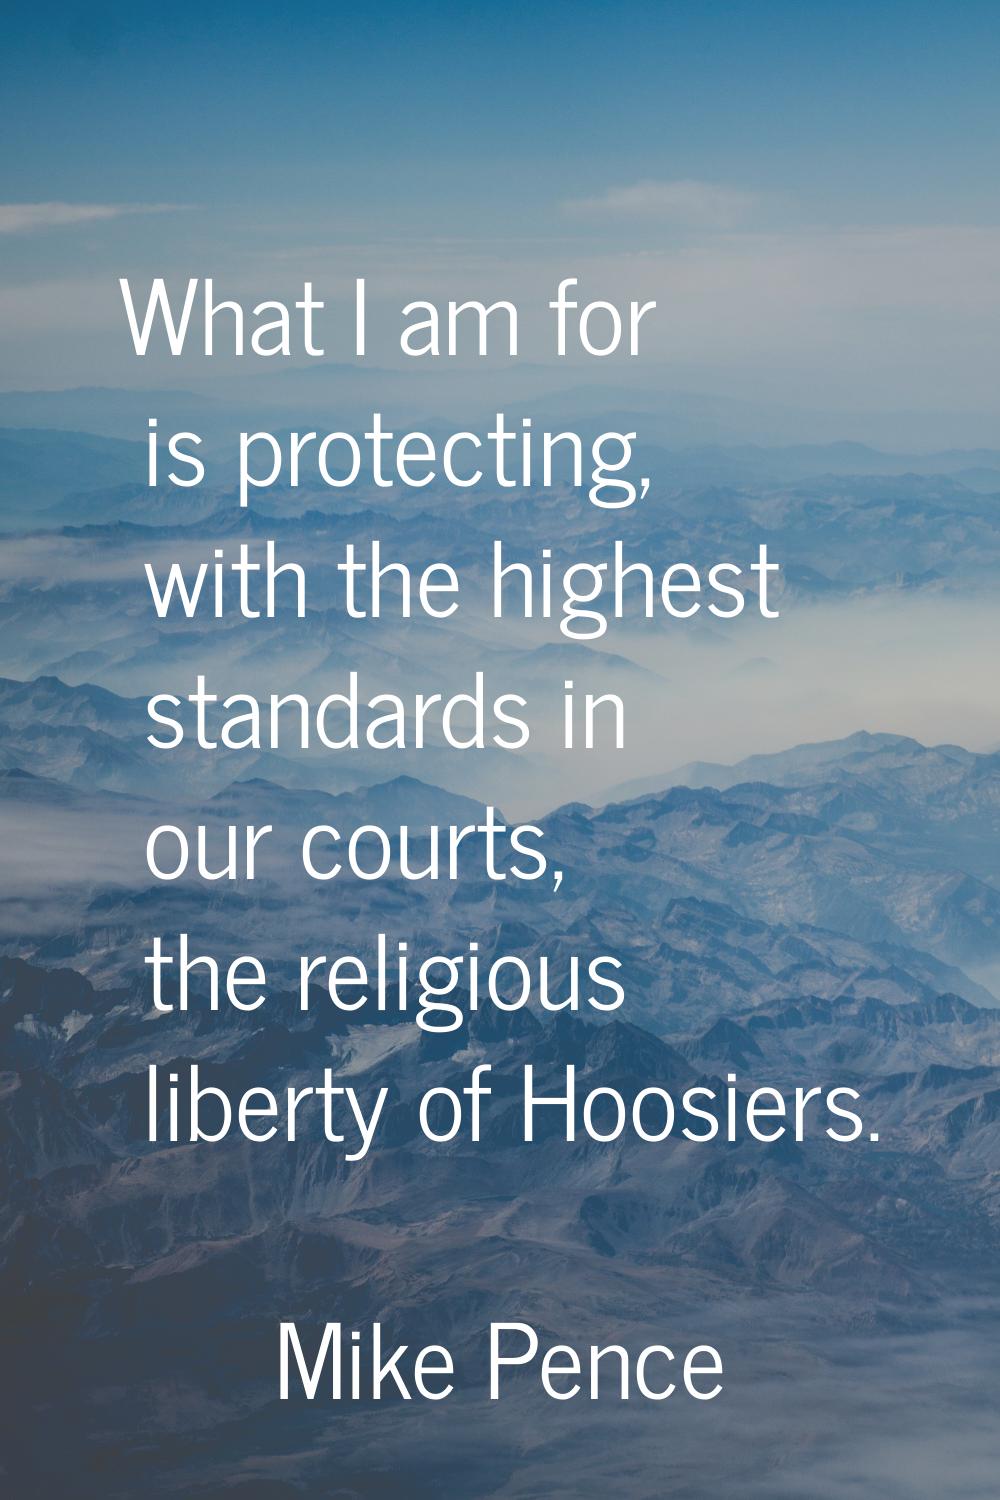 What I am for is protecting, with the highest standards in our courts, the religious liberty of Hoo